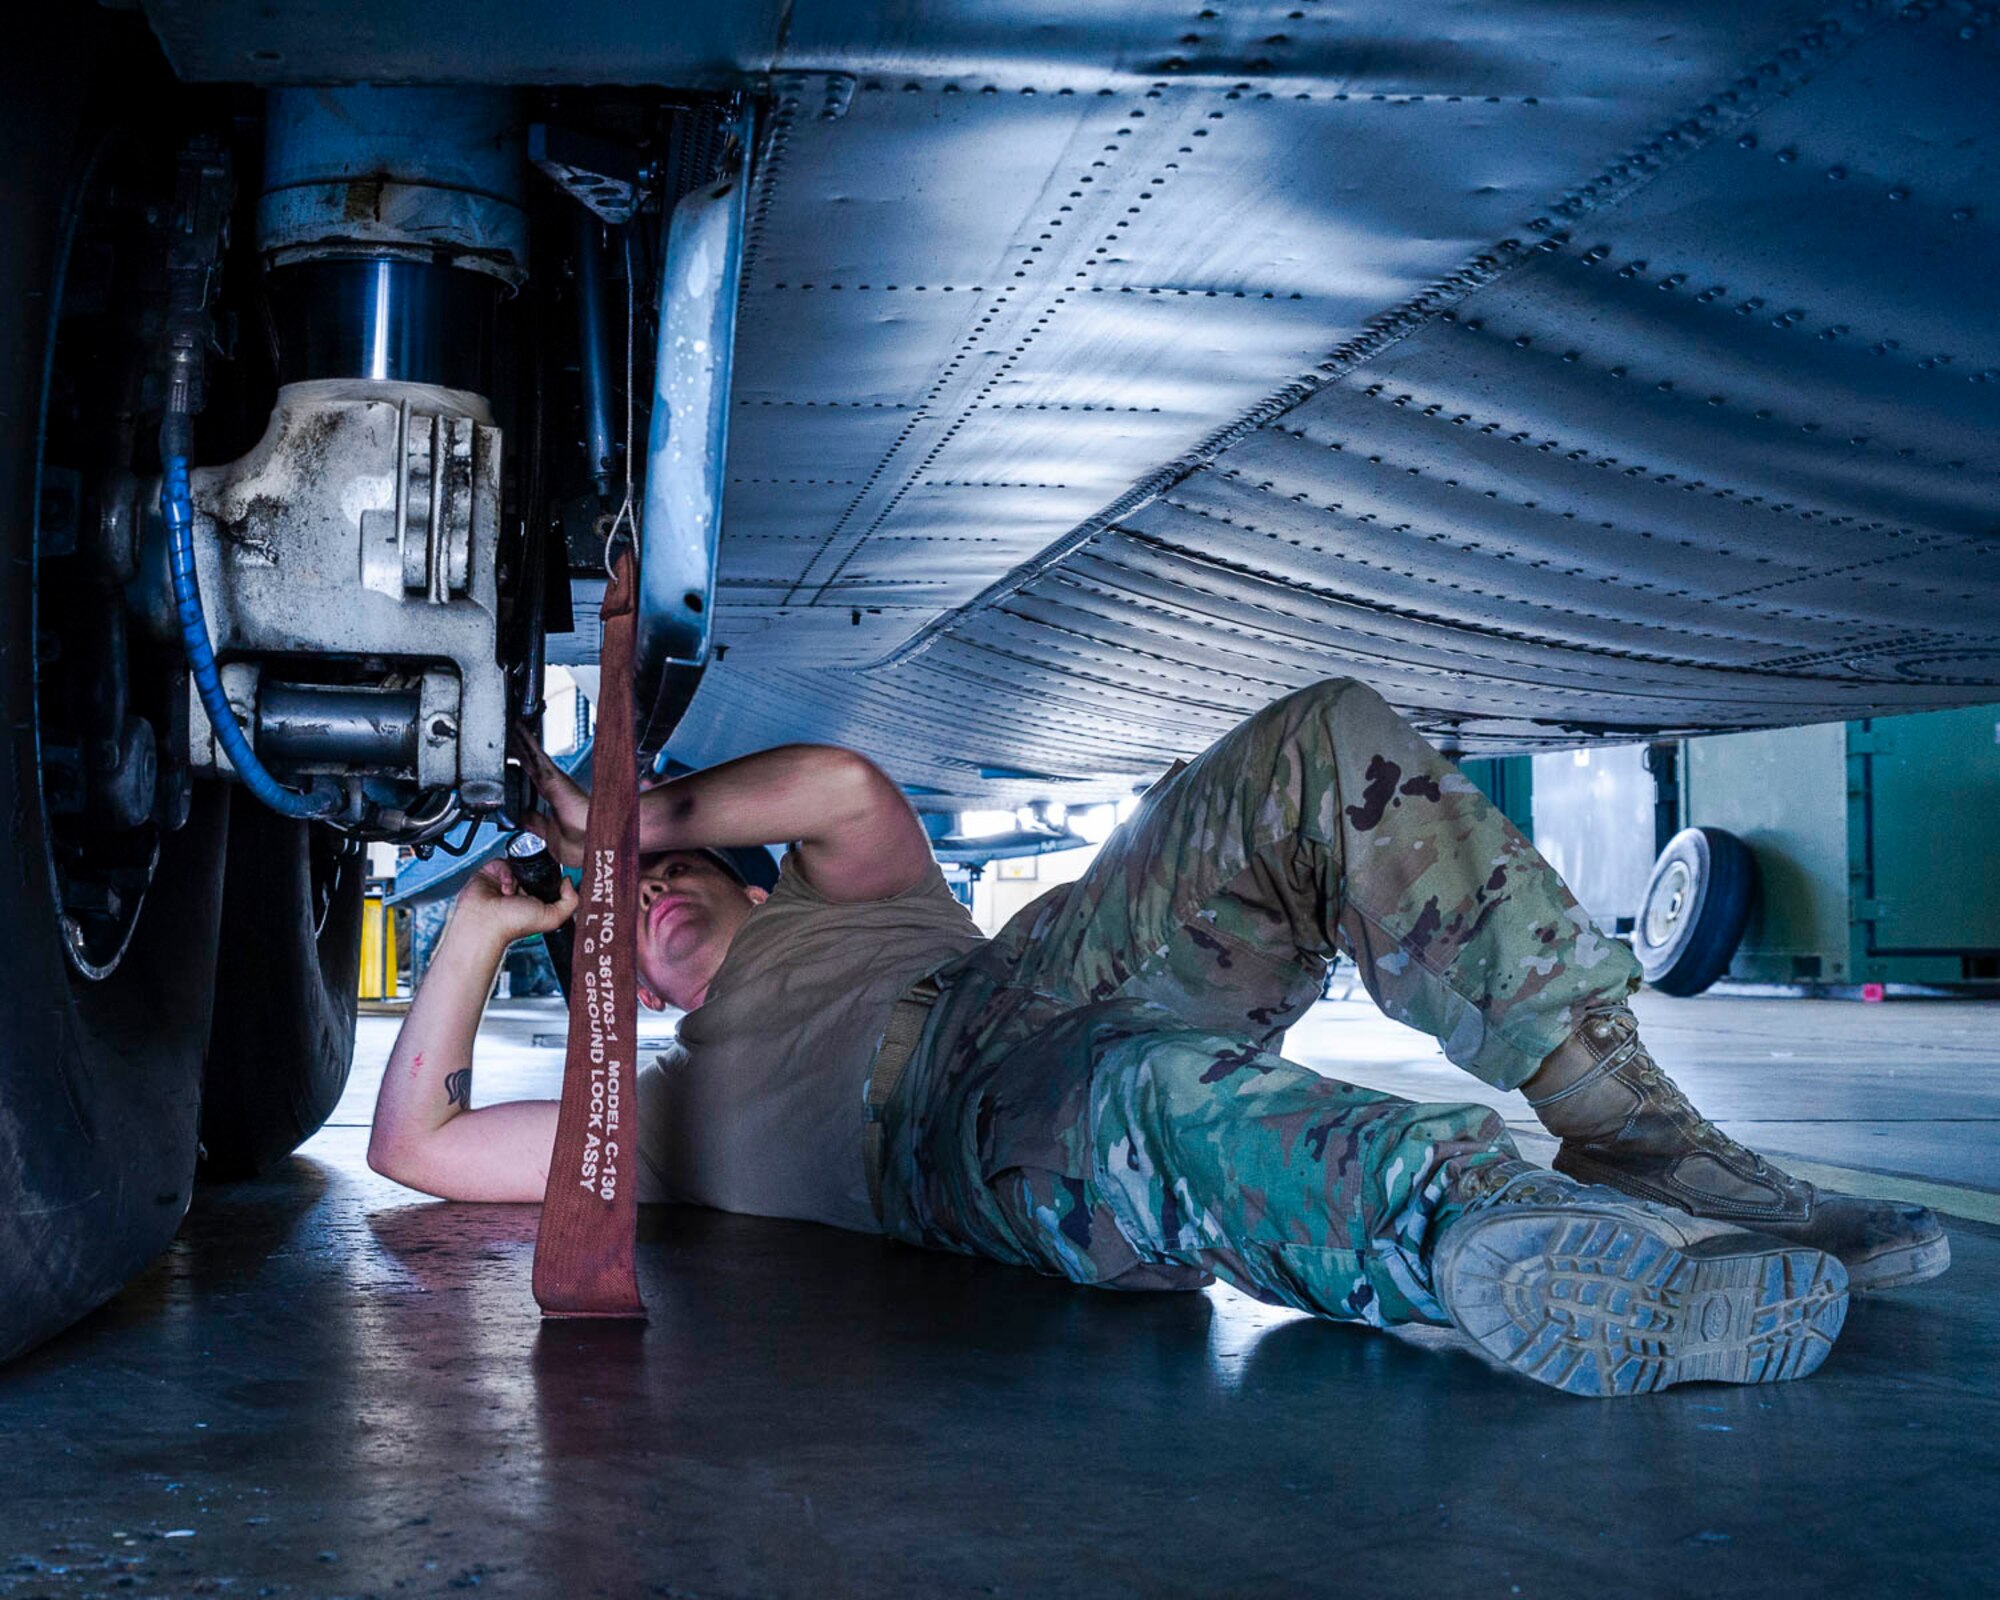 Air Force Reserve Airman from the 913th Maintenance Squadron work with 19th Airlift Wing active duty members to troubleshoot the landing gear of a C-130J Hercules on August 15, 2019, at Little Rock Air Force Base, Ark.  There are 20 Reserve members who work with Team Little Rock maintenance personnel to ensure combat airlift is available. Mobility aircraft, such as the C-130J, deliver critical personnel and cargo and provide airdrop of time-sensitive supplies, food and ammunition on a global scale. A critical part of the airlift capabilities are the efforts of the maintenance personnel who ensure the workhorse of the mobility force, the C-130, is always ready, always there! (U.S. Air Force Reserve photo by Maj. Ashley Walker)